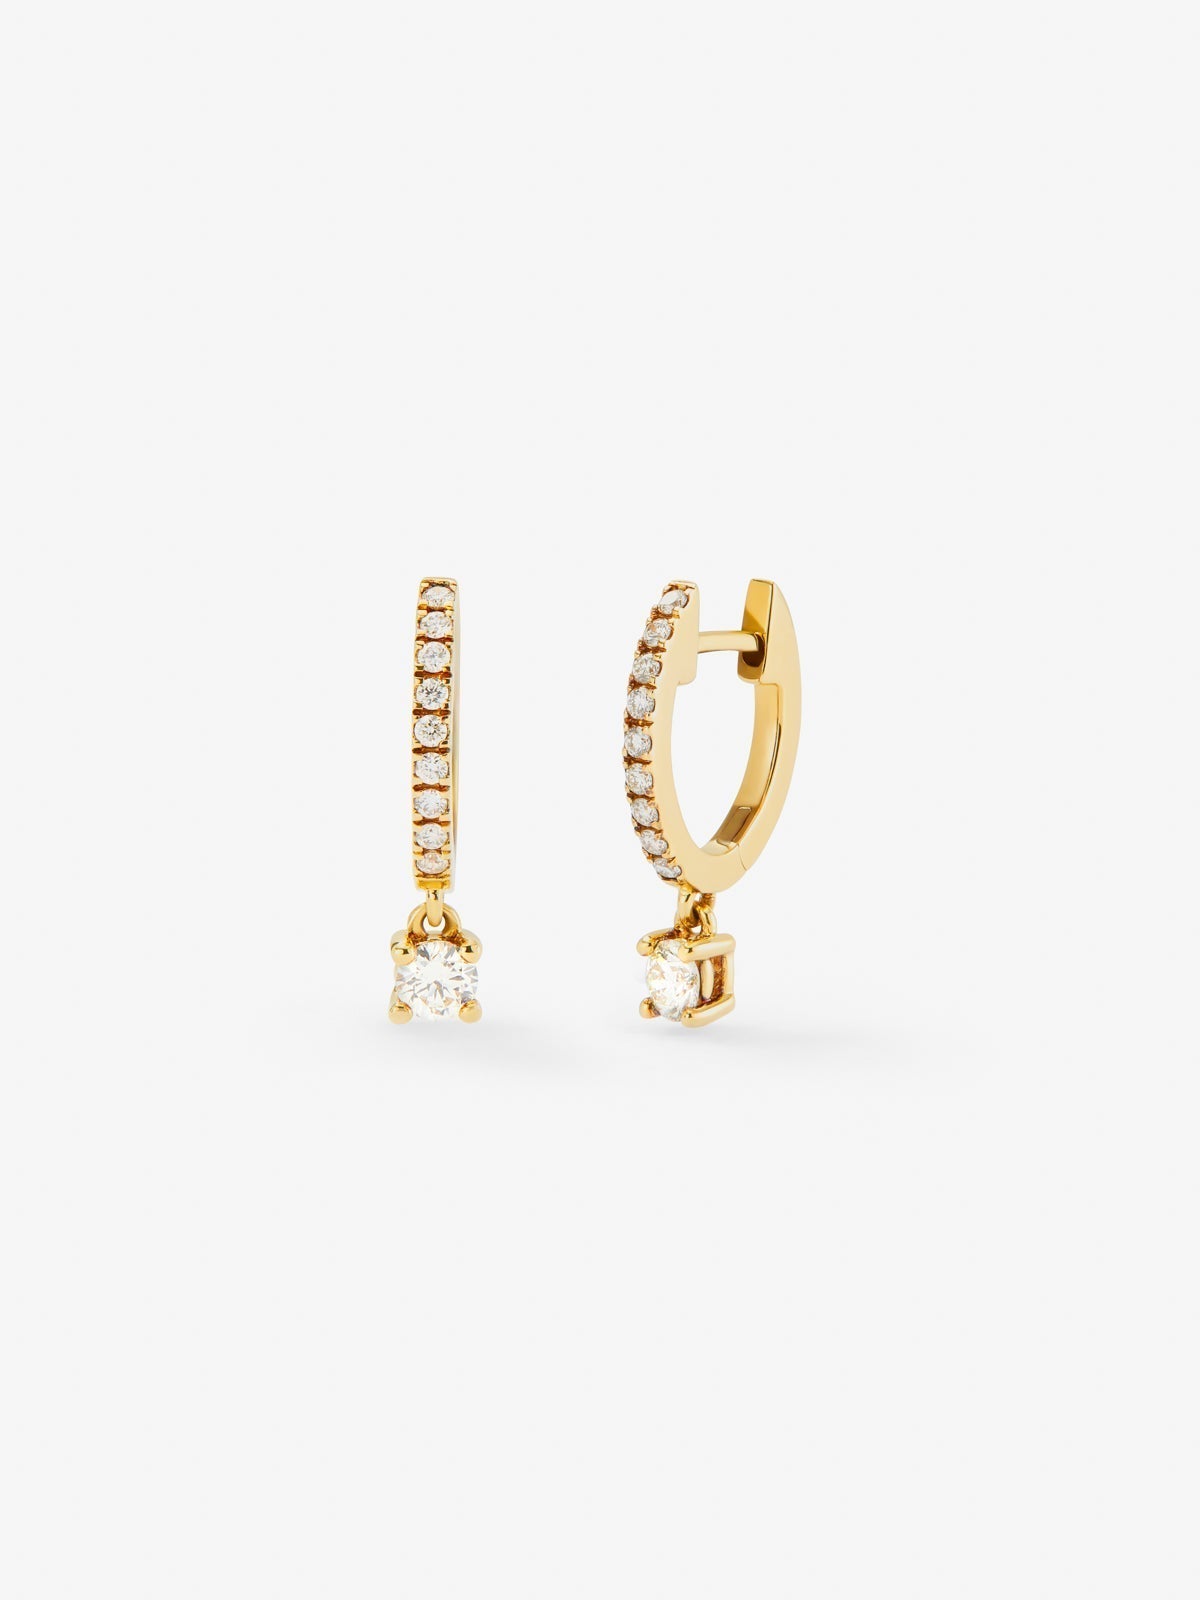 18K yellow gold earrings with 22 brilliant-cut diamonds with a total of 0.41 cts